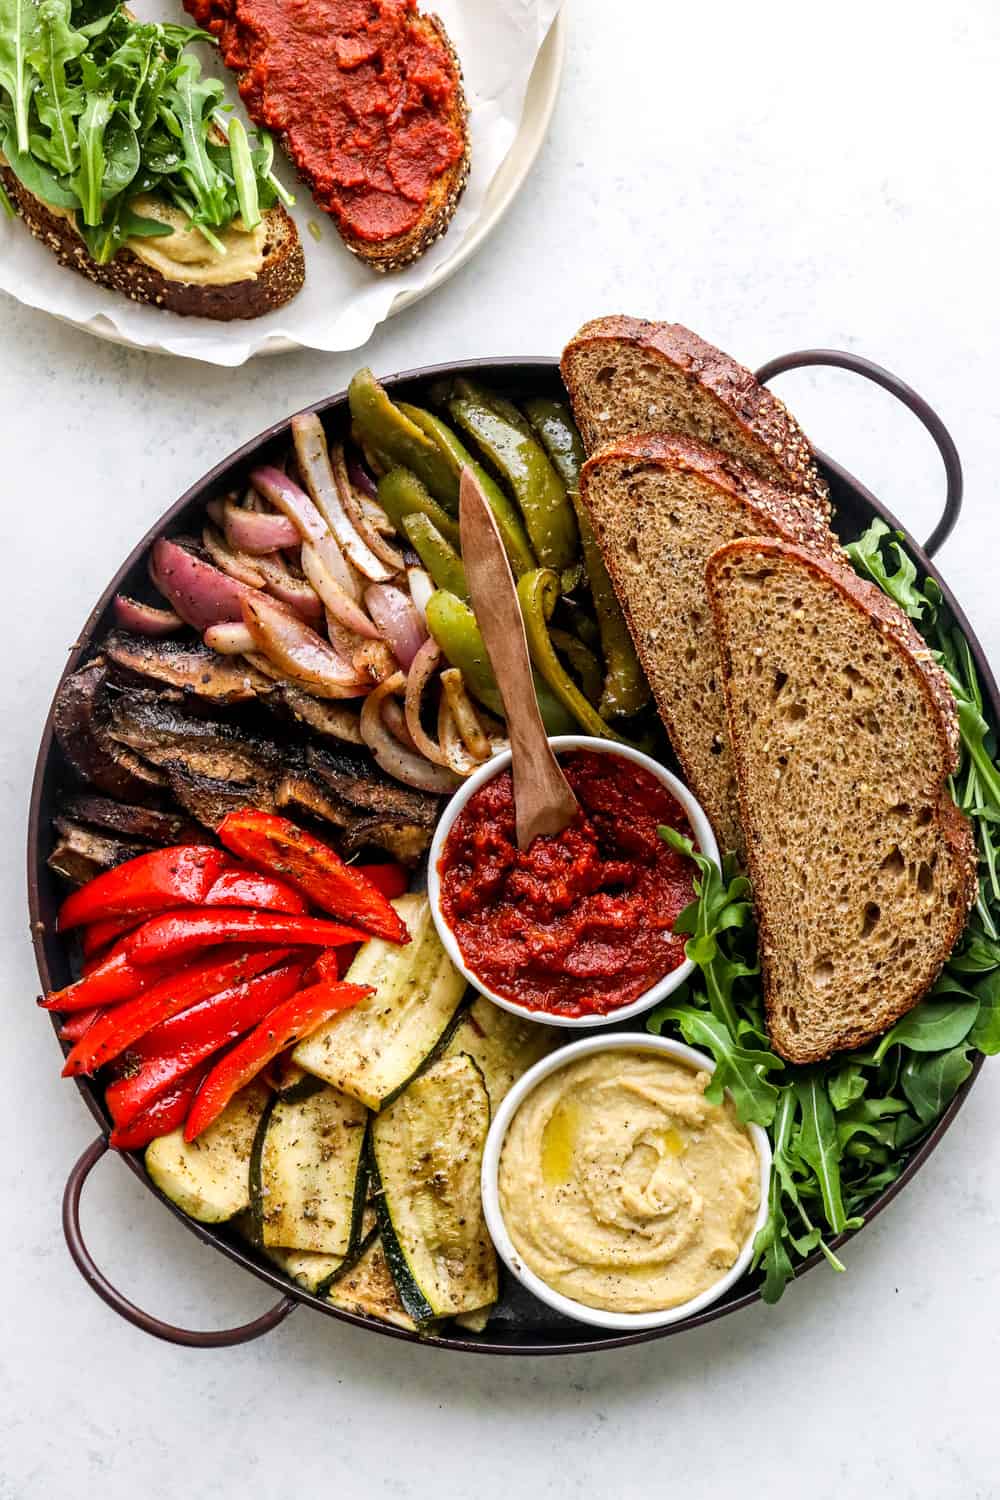 Dark round platter filled with roasted veggies and items for a hummus sandwich with a red tomato spread and hummus in bowls on the platter. 